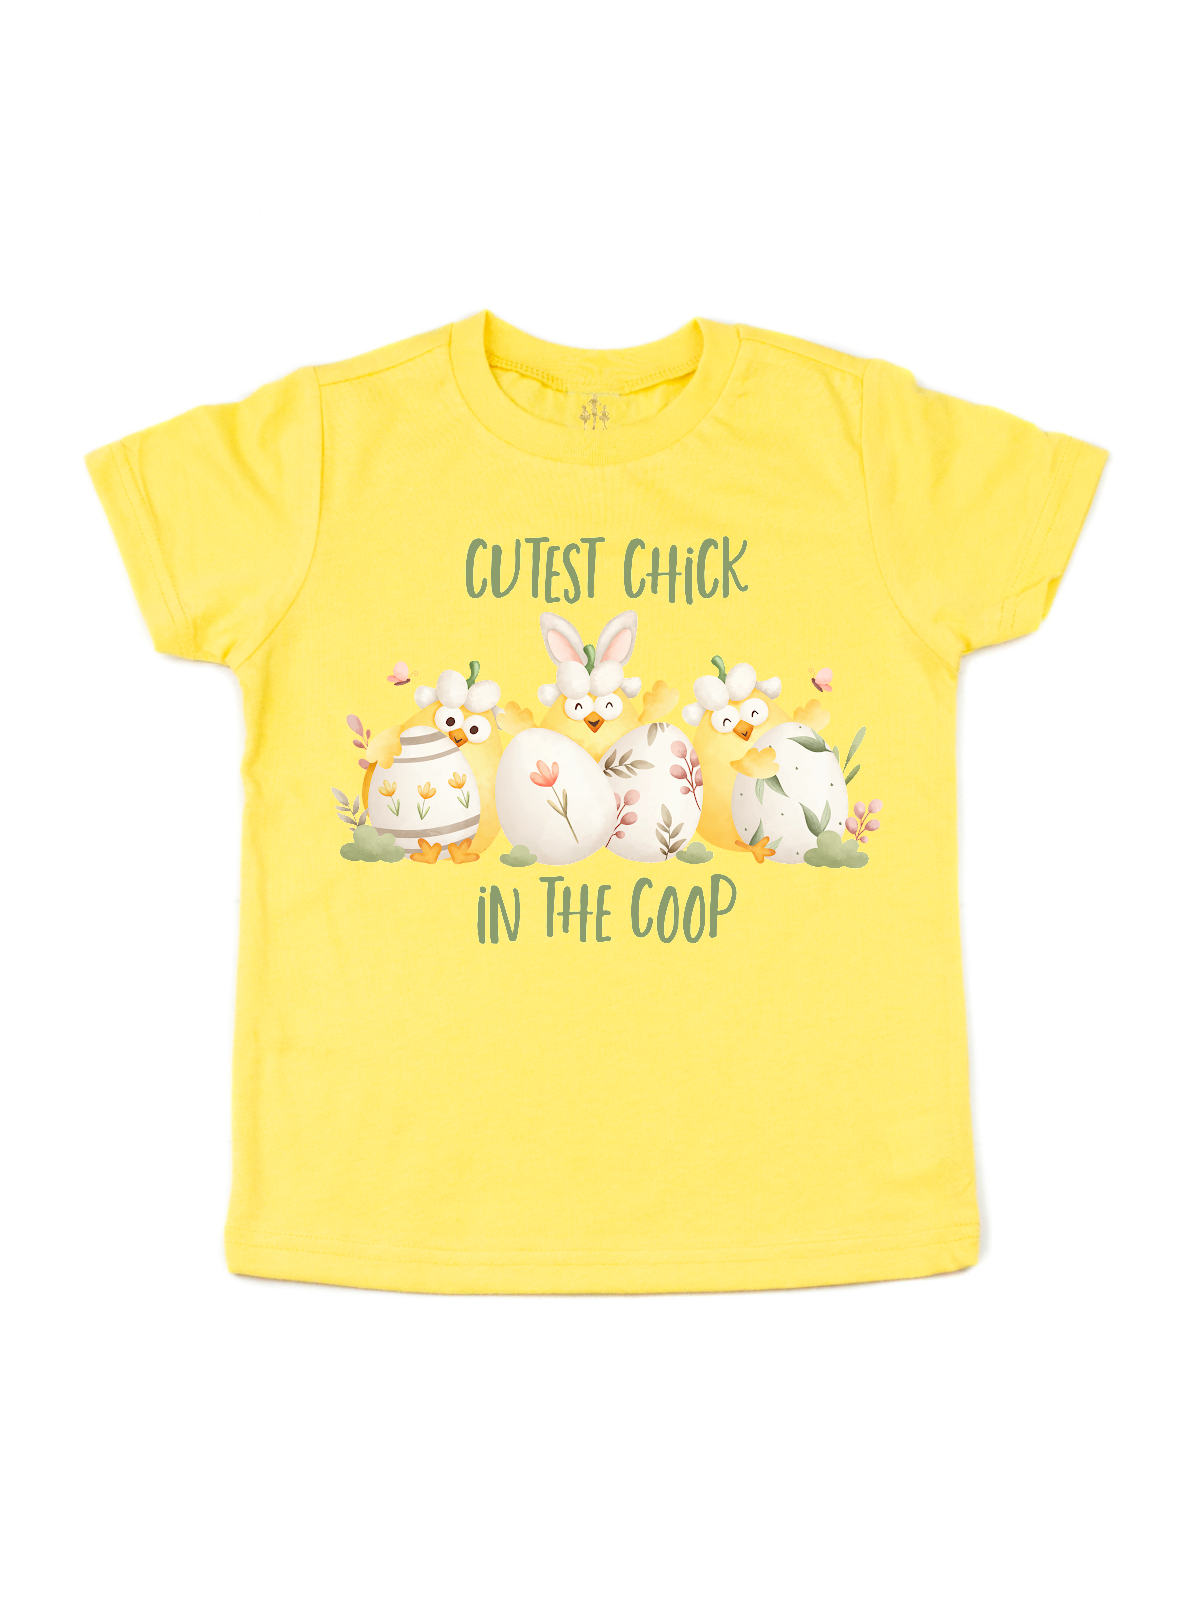 Cutest Chick in the Coop Yellow Girls Easter Shirt